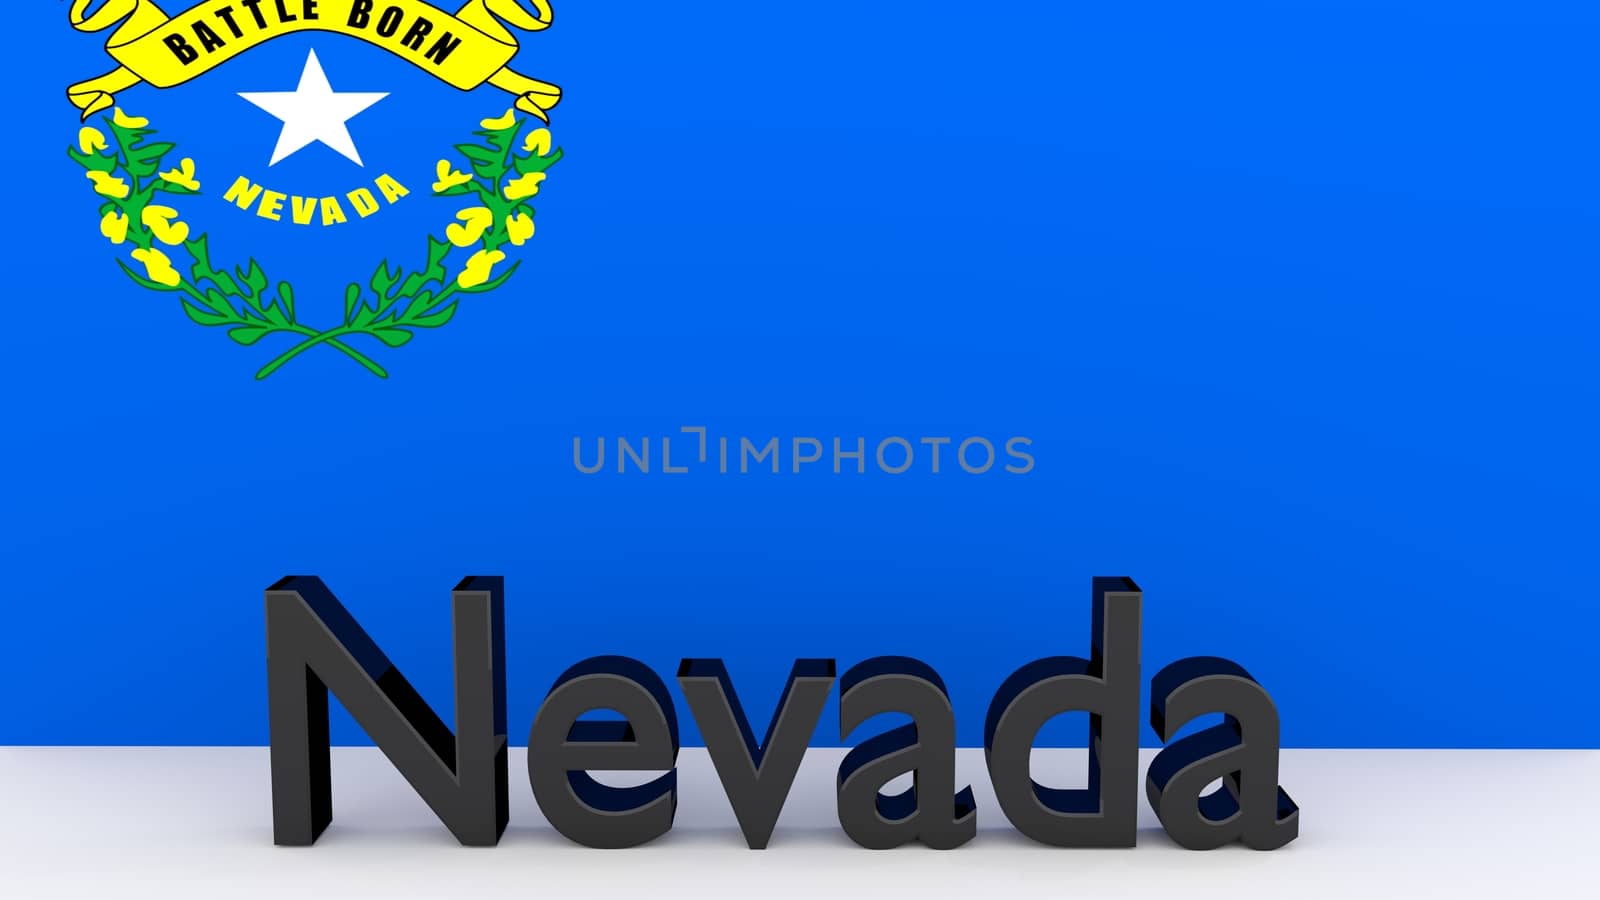 US state Nevada, metal name in front of flag by MarkDw